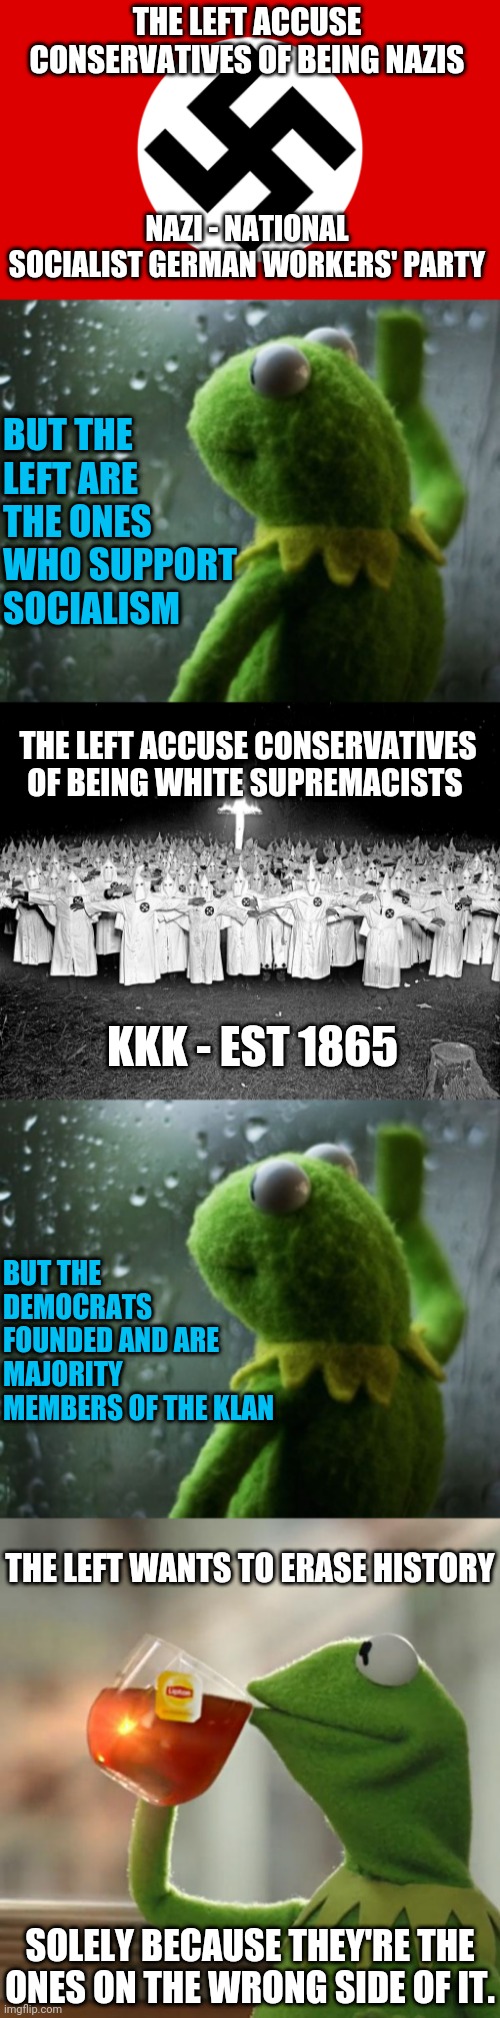 THE LEFT ACCUSE CONSERVATIVES OF BEING NAZIS; NAZI - NATIONAL SOCIALIST GERMAN WORKERS' PARTY; BUT THE LEFT ARE THE ONES WHO SUPPORT SOCIALISM; THE LEFT ACCUSE CONSERVATIVES OF BEING WHITE SUPREMACISTS; KKK - EST 1865; BUT THE DEMOCRATS FOUNDED AND ARE MAJORITY MEMBERS OF THE KLAN; THE LEFT WANTS TO ERASE HISTORY; SOLELY BECAUSE THEY'RE THE ONES ON THE WRONG SIDE OF IT. | image tagged in nazi germany,sometimes i wonder,kkk religion,memes,but that's none of my business | made w/ Imgflip meme maker